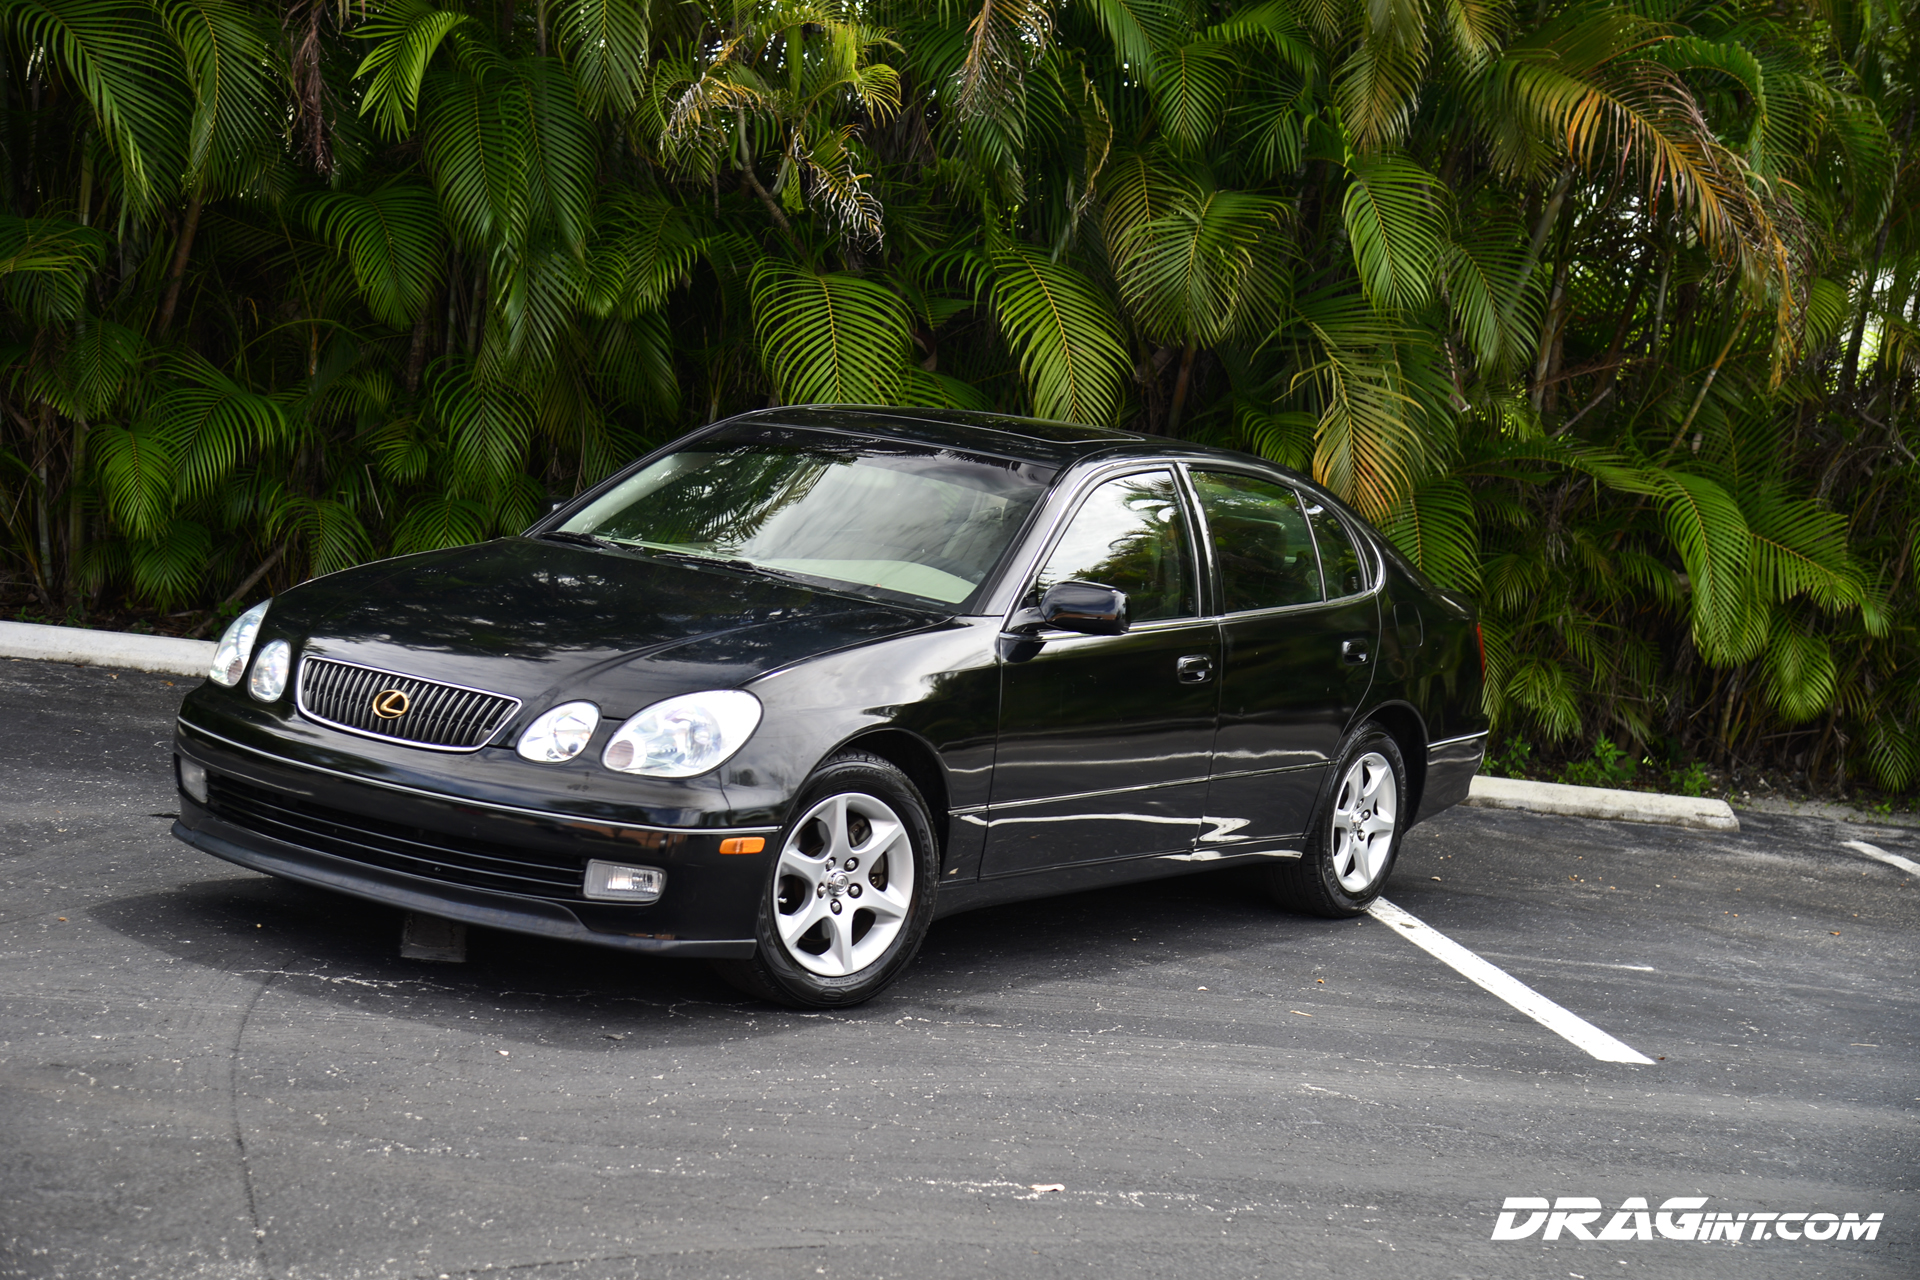 FOR SALE : DRAGint Swapped GS300 – Cost Effective Twin Turbo Power! | DRAG  International